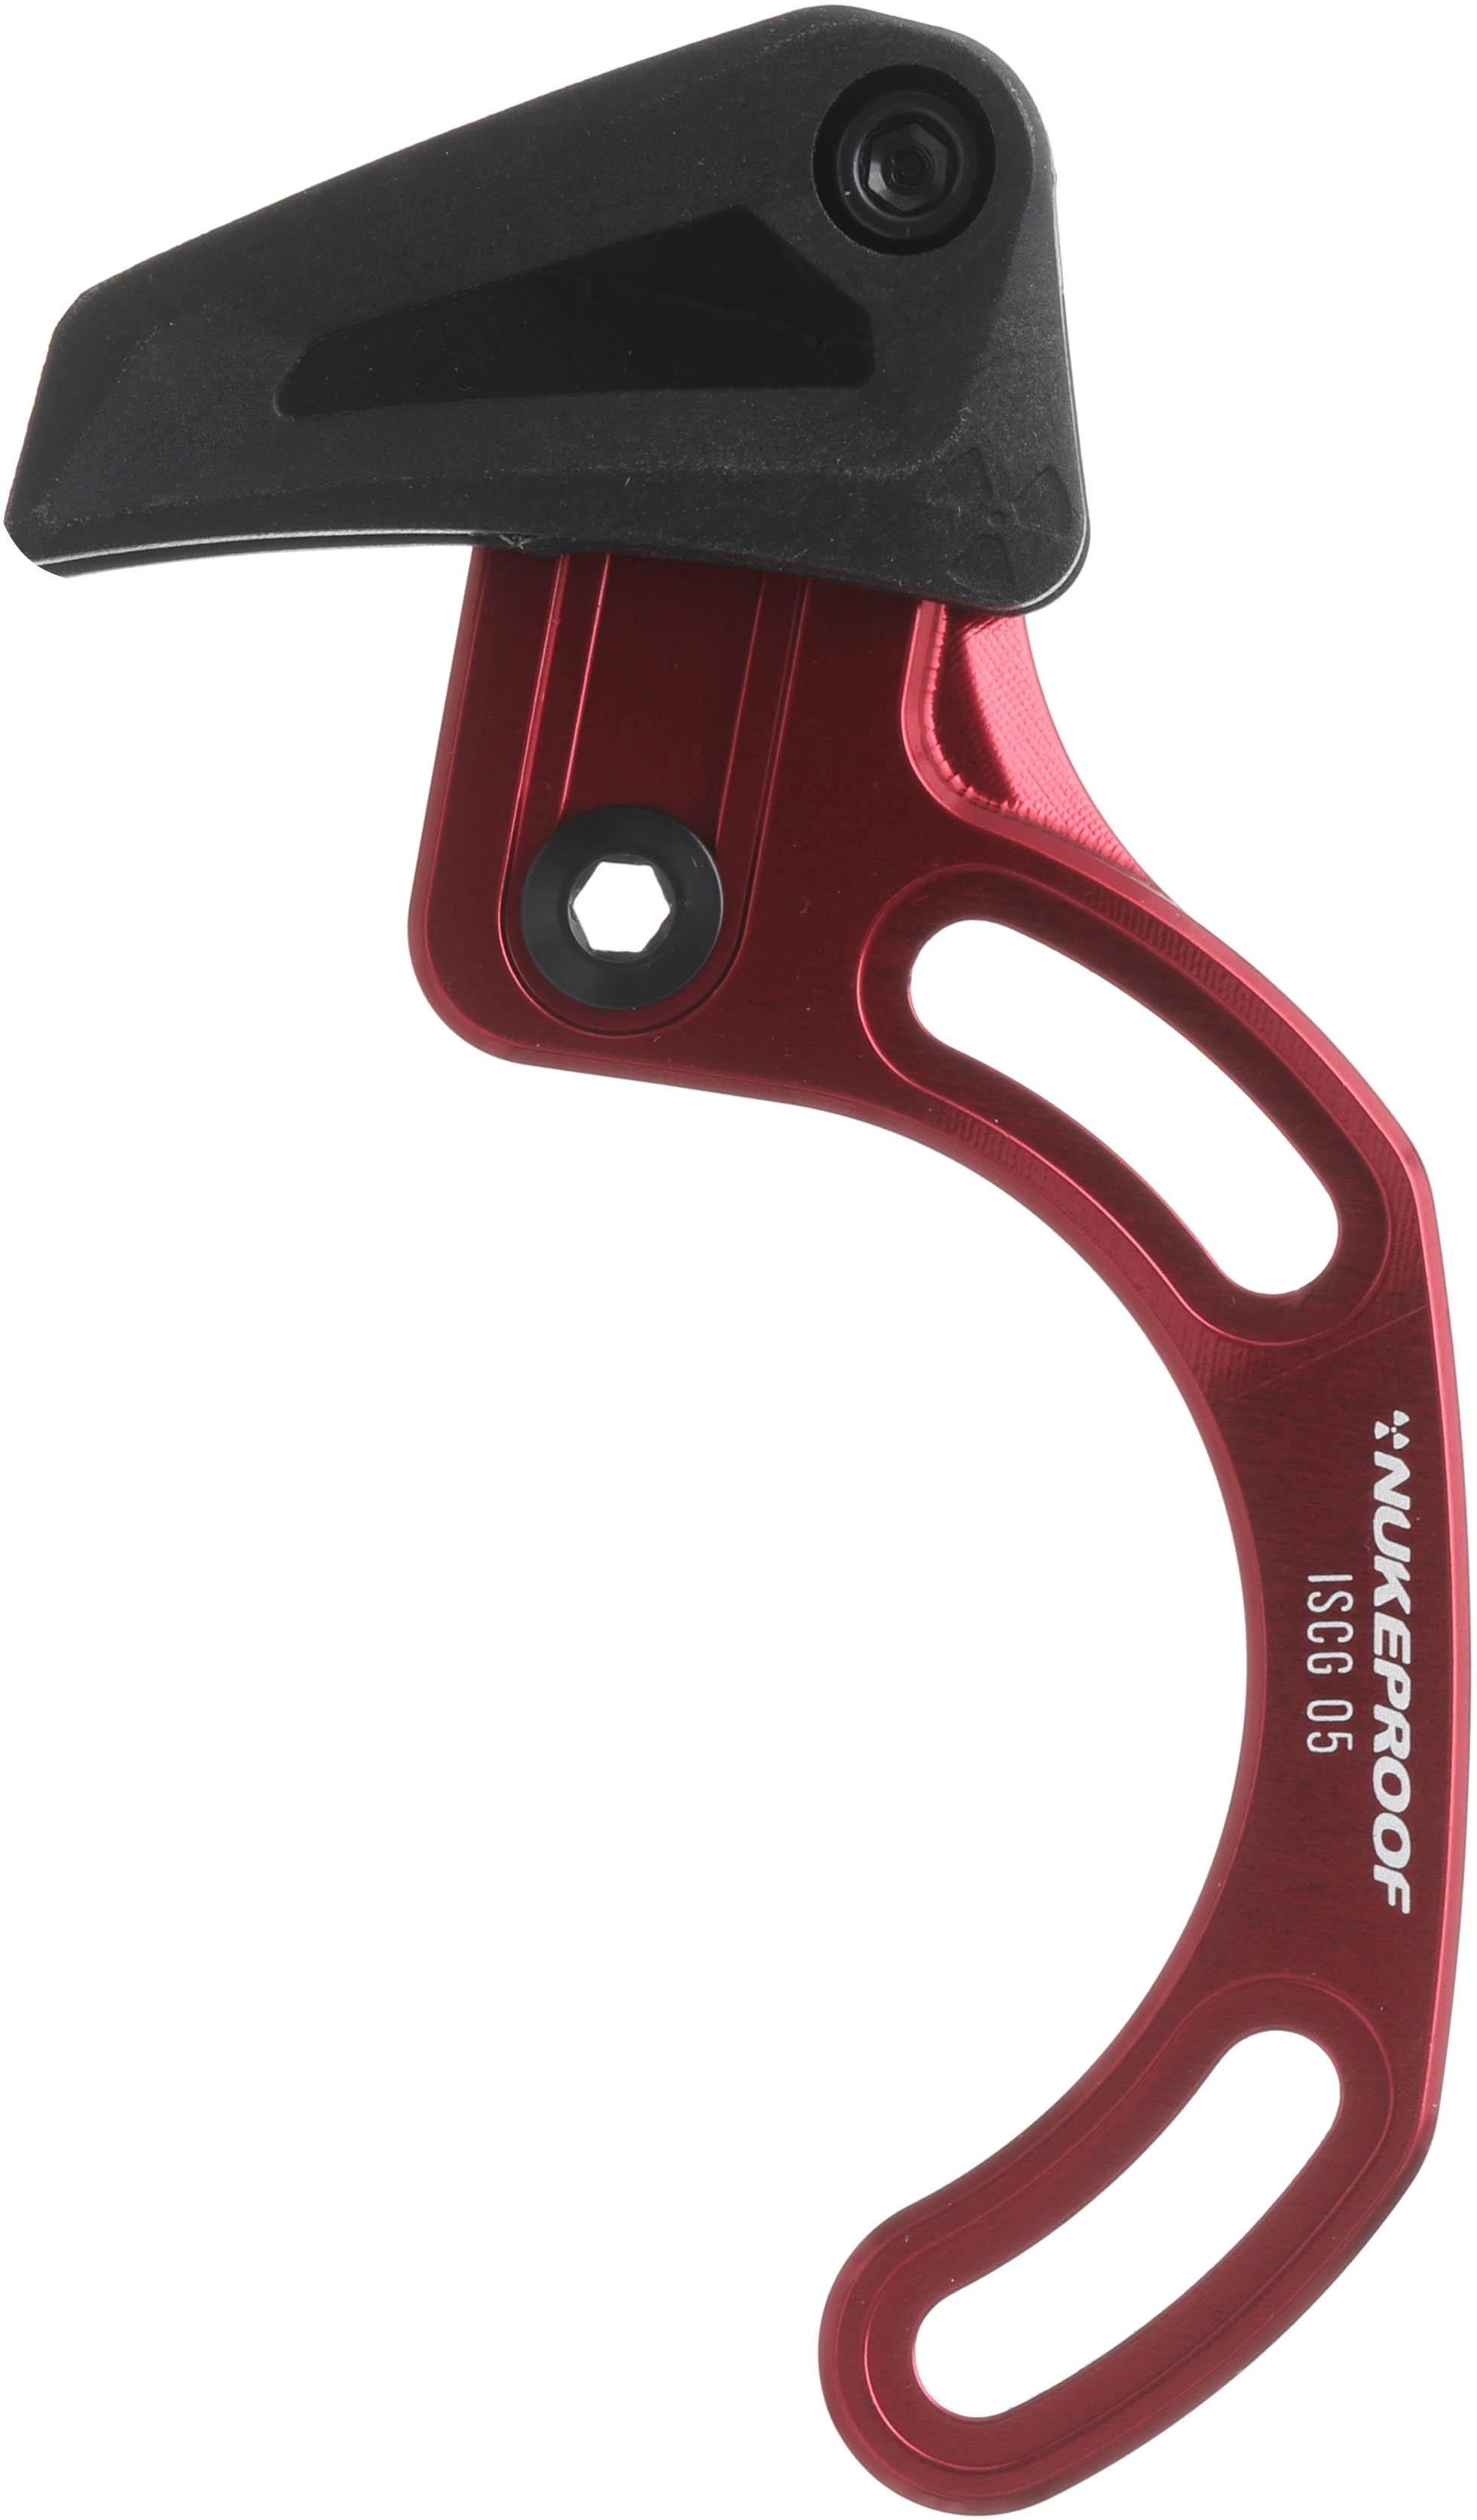 Nukeproof Chain Guide Iscg 05 Top Guide  Red -black